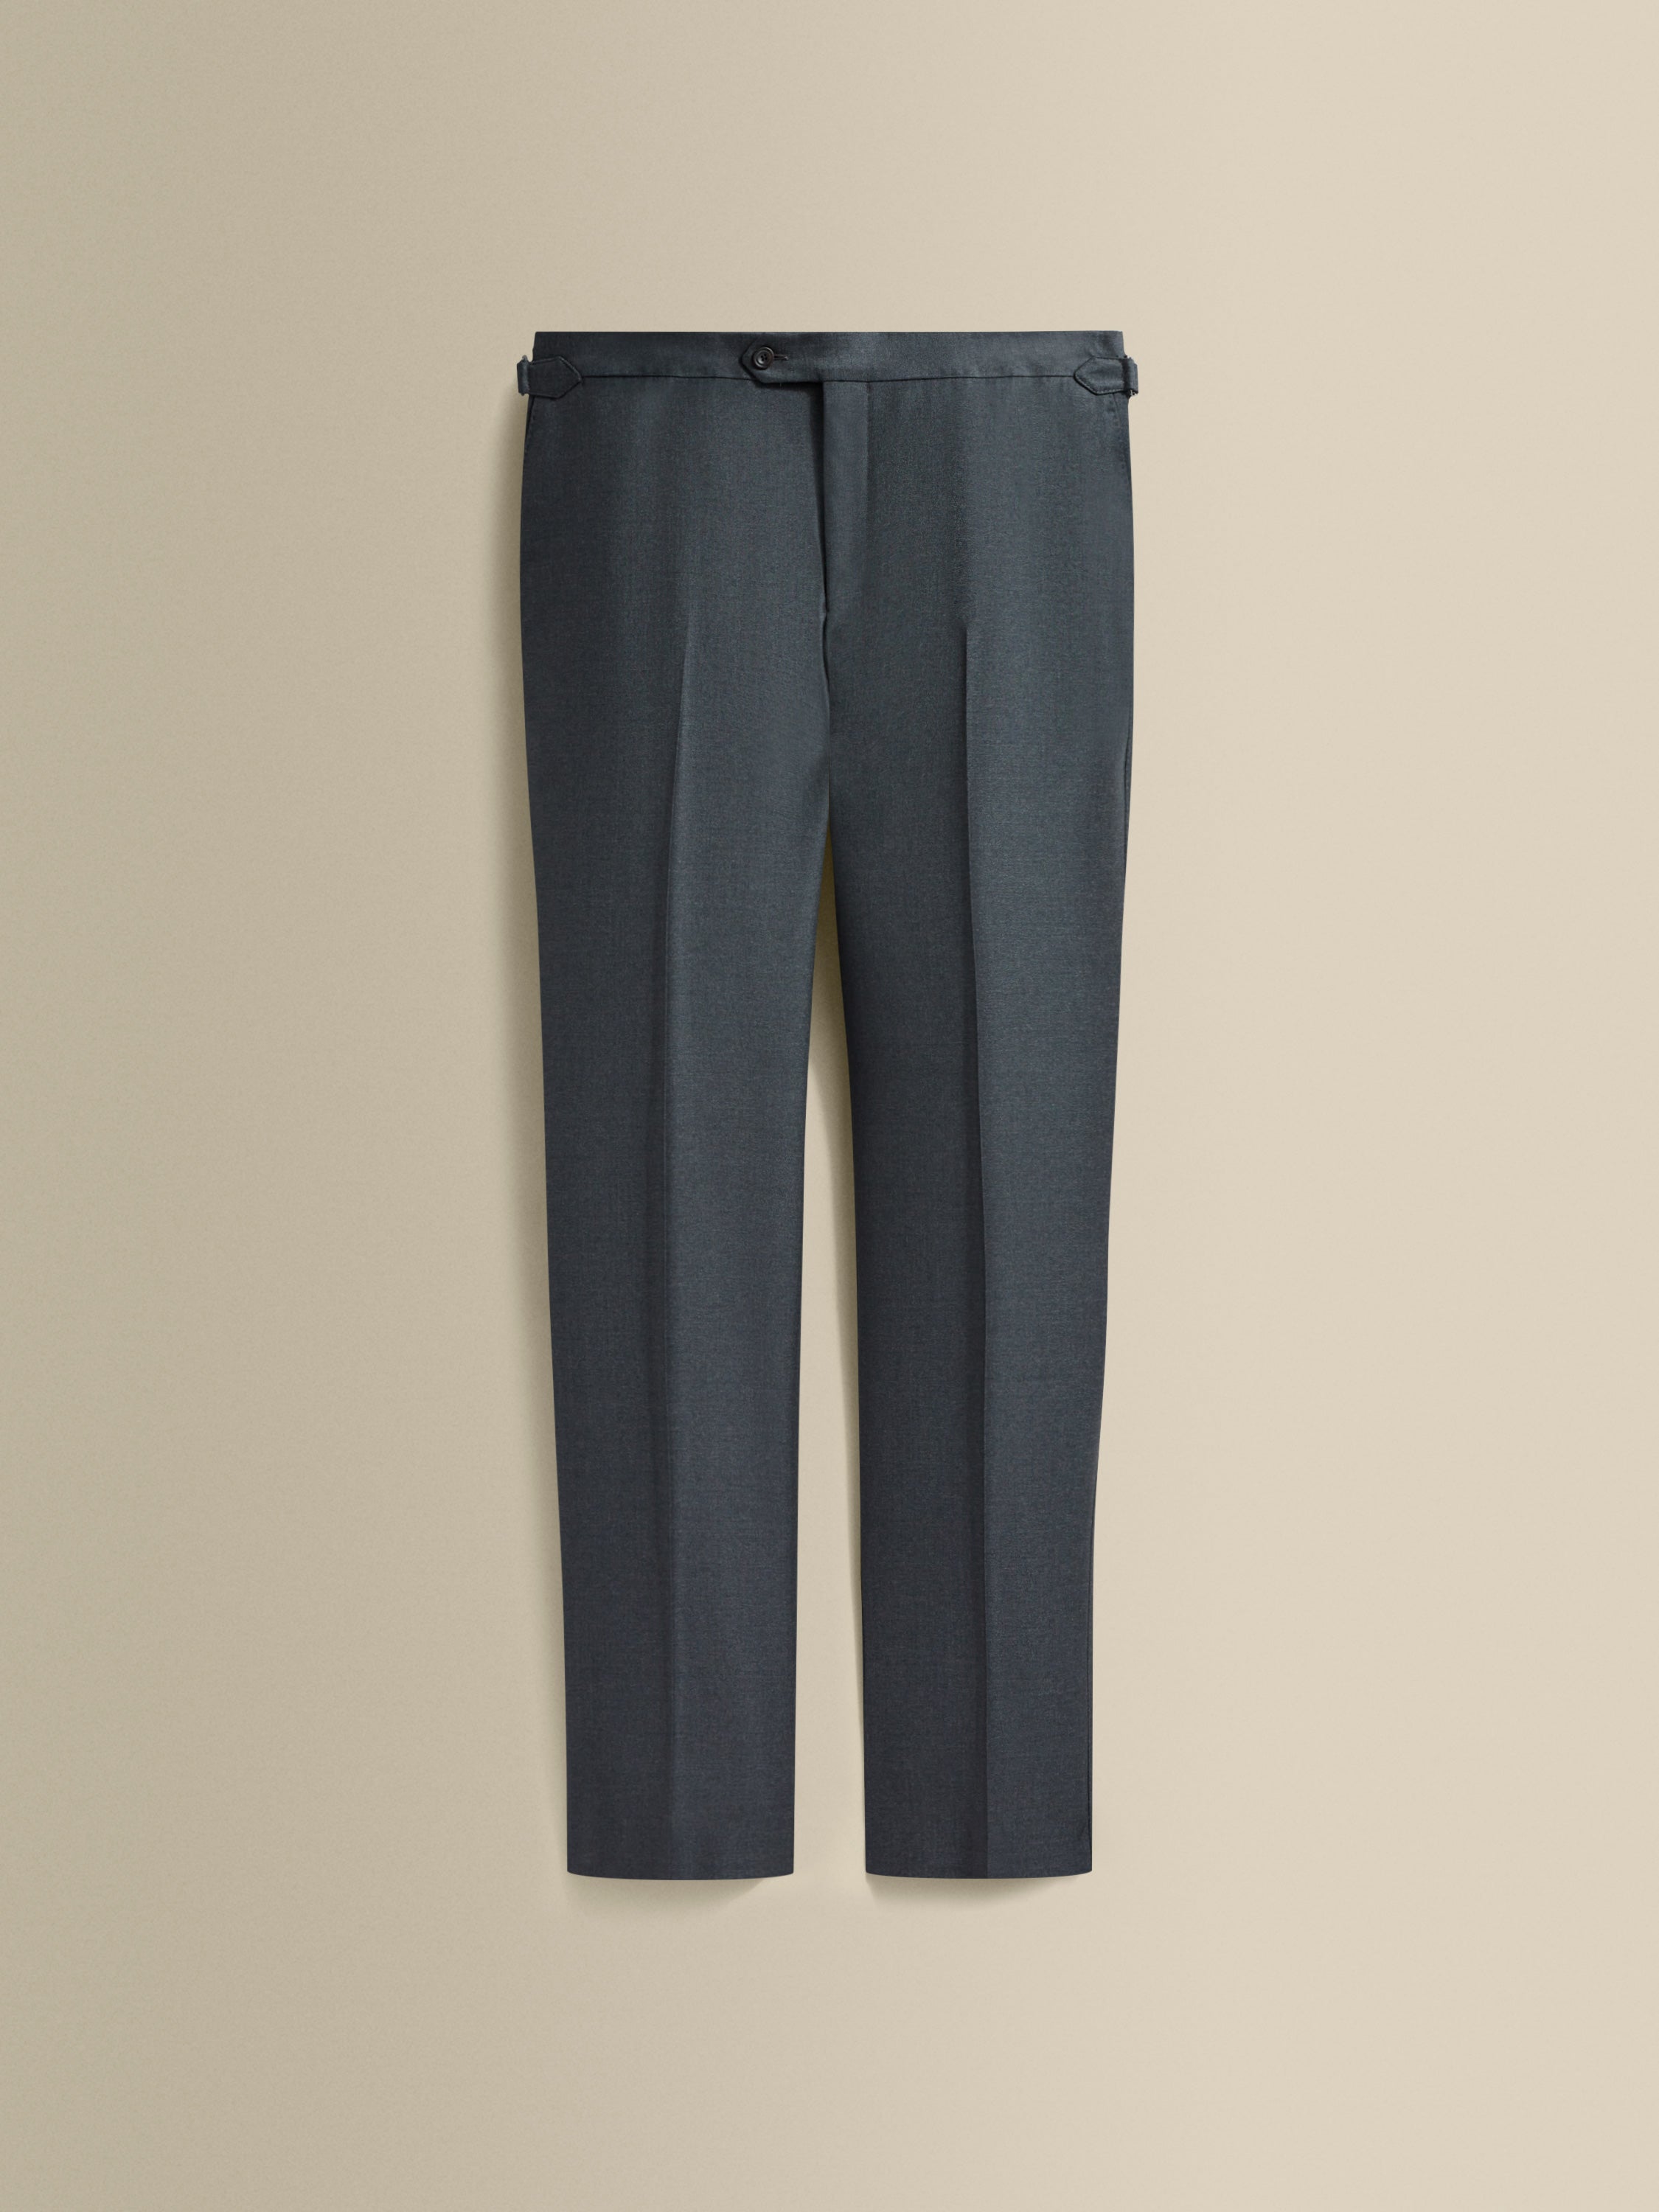 Single Breasted Wool Weighhouse Suit Grey Trouser Product Image